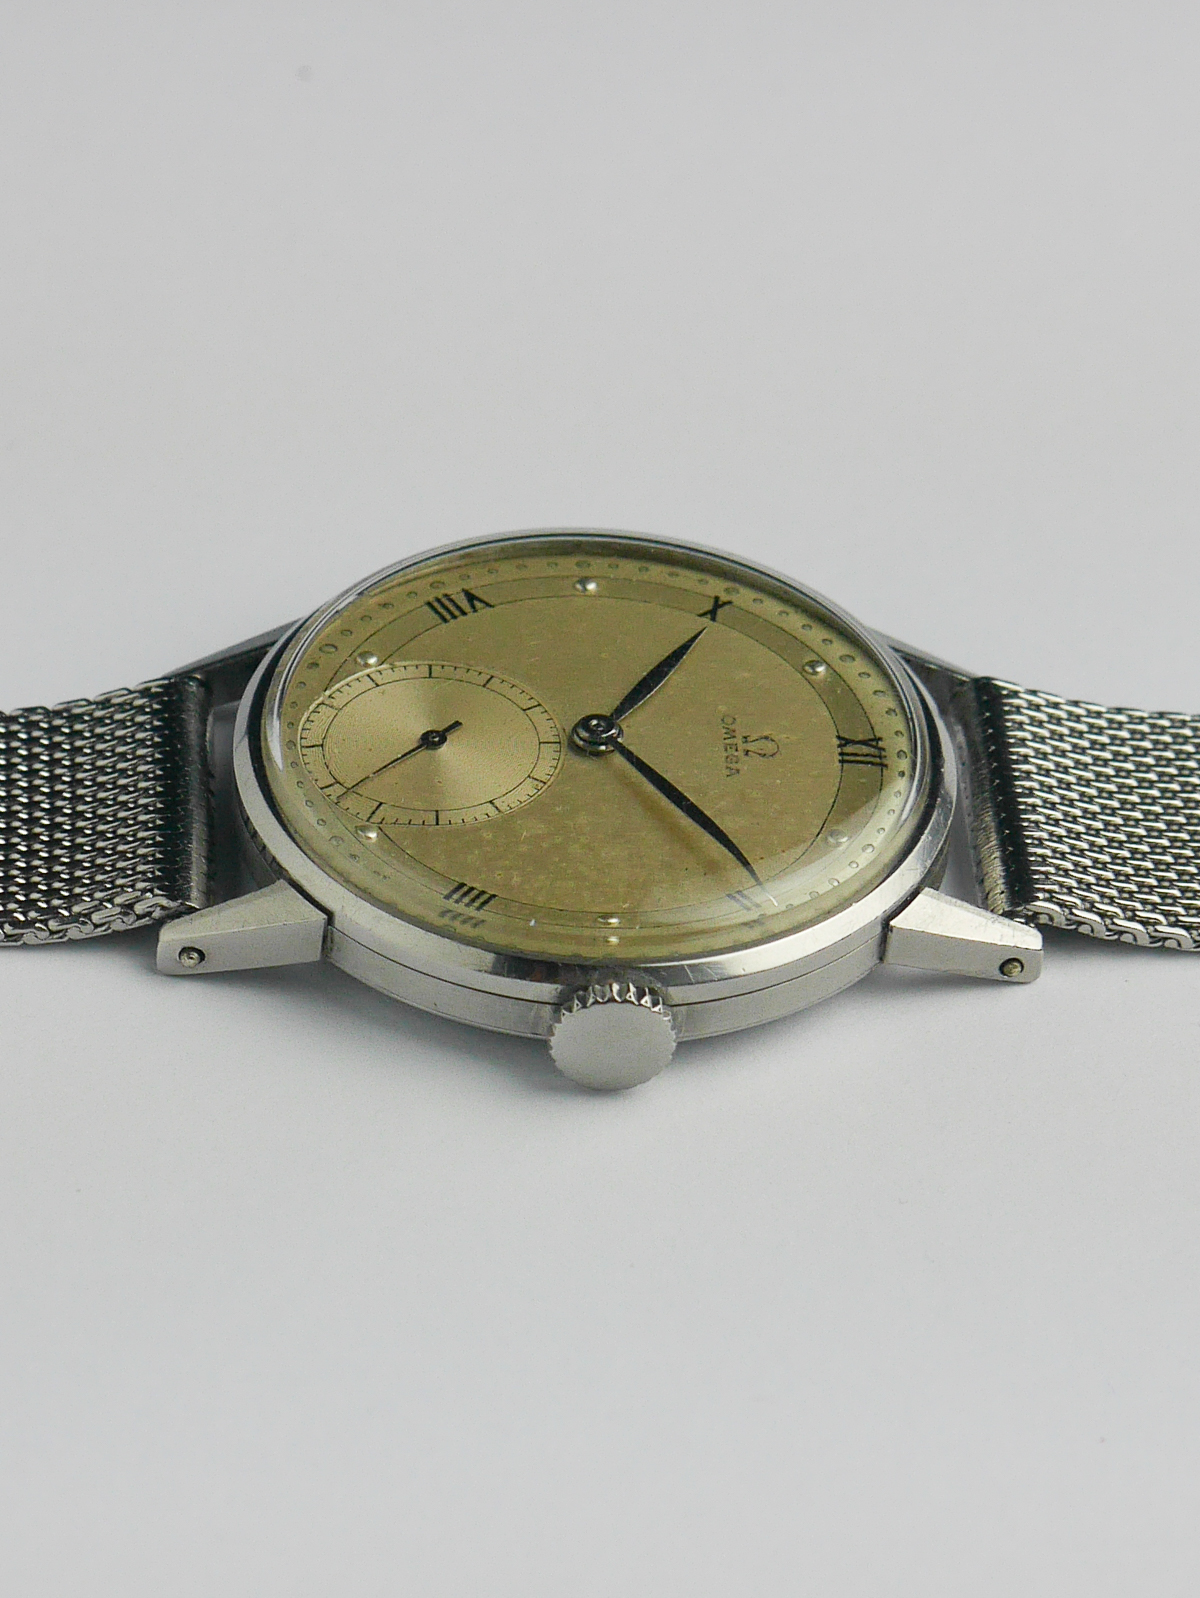 1940s Omega ref. 2271-7 with 30T2 caliber - Sabiwatches